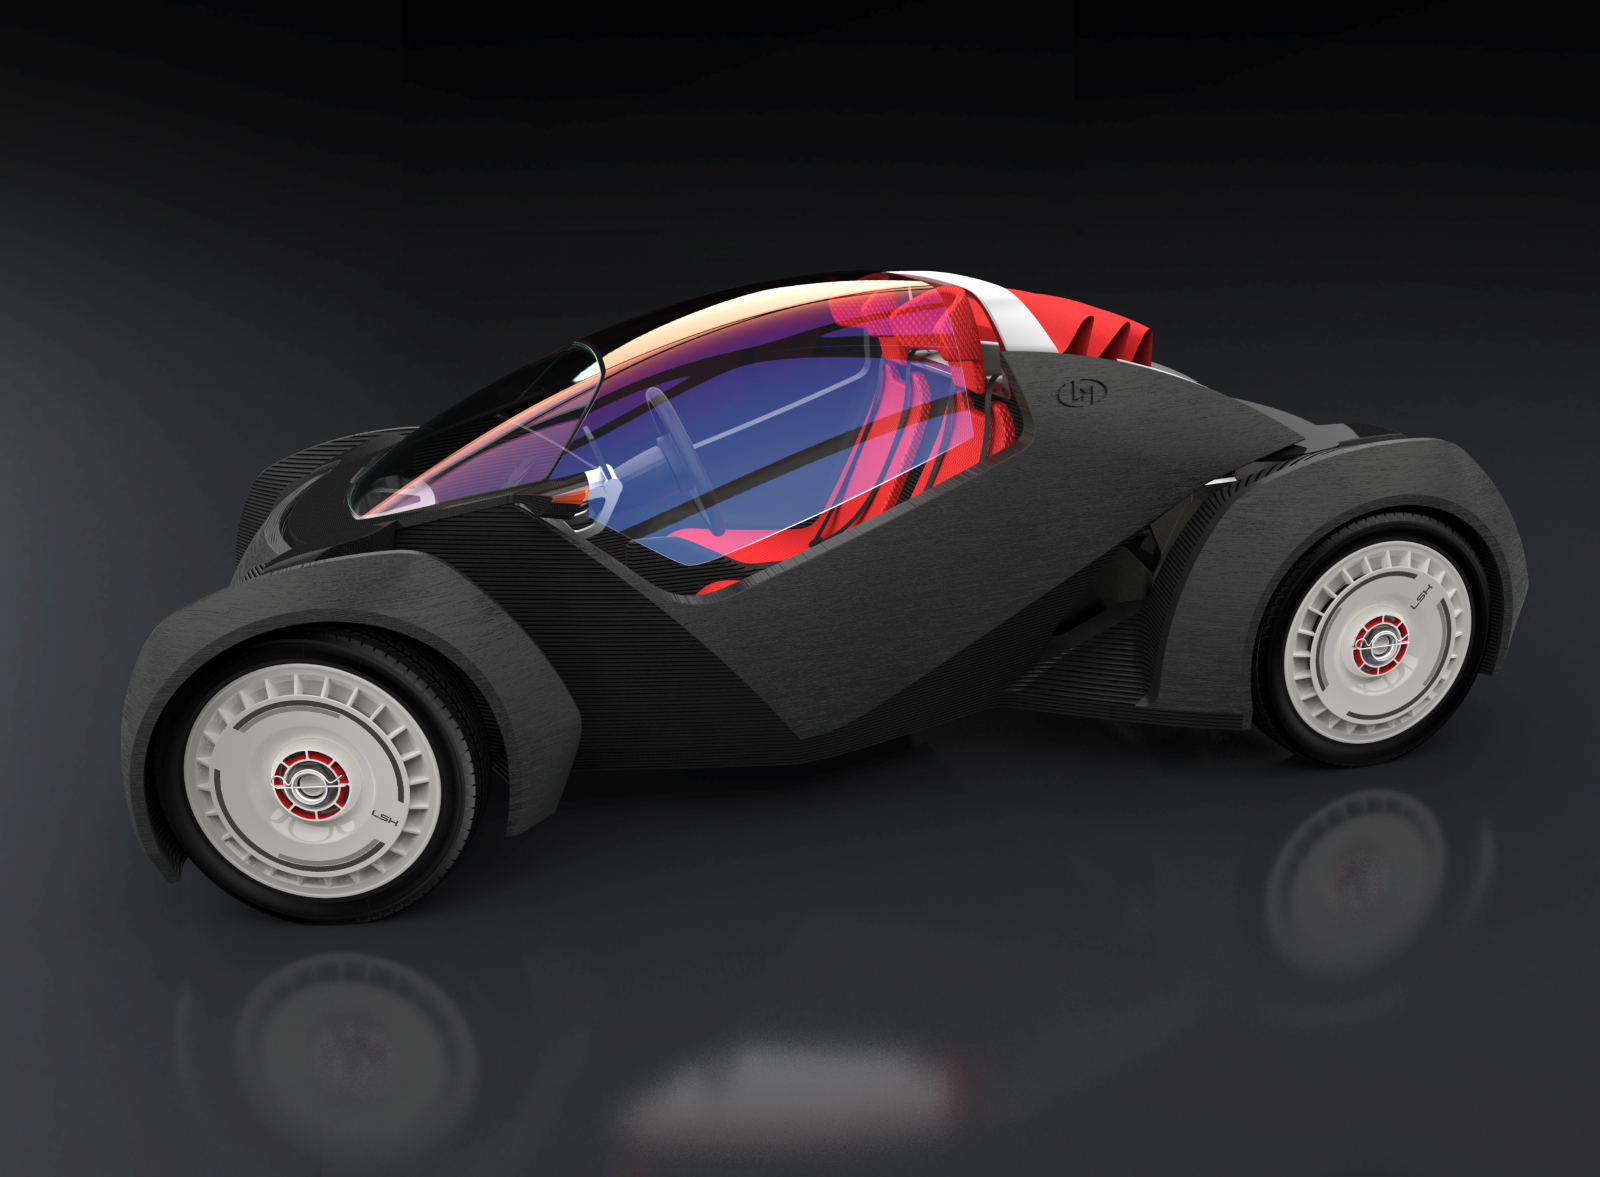 Take a look at the most amazing 3D Printed Cars in the World!